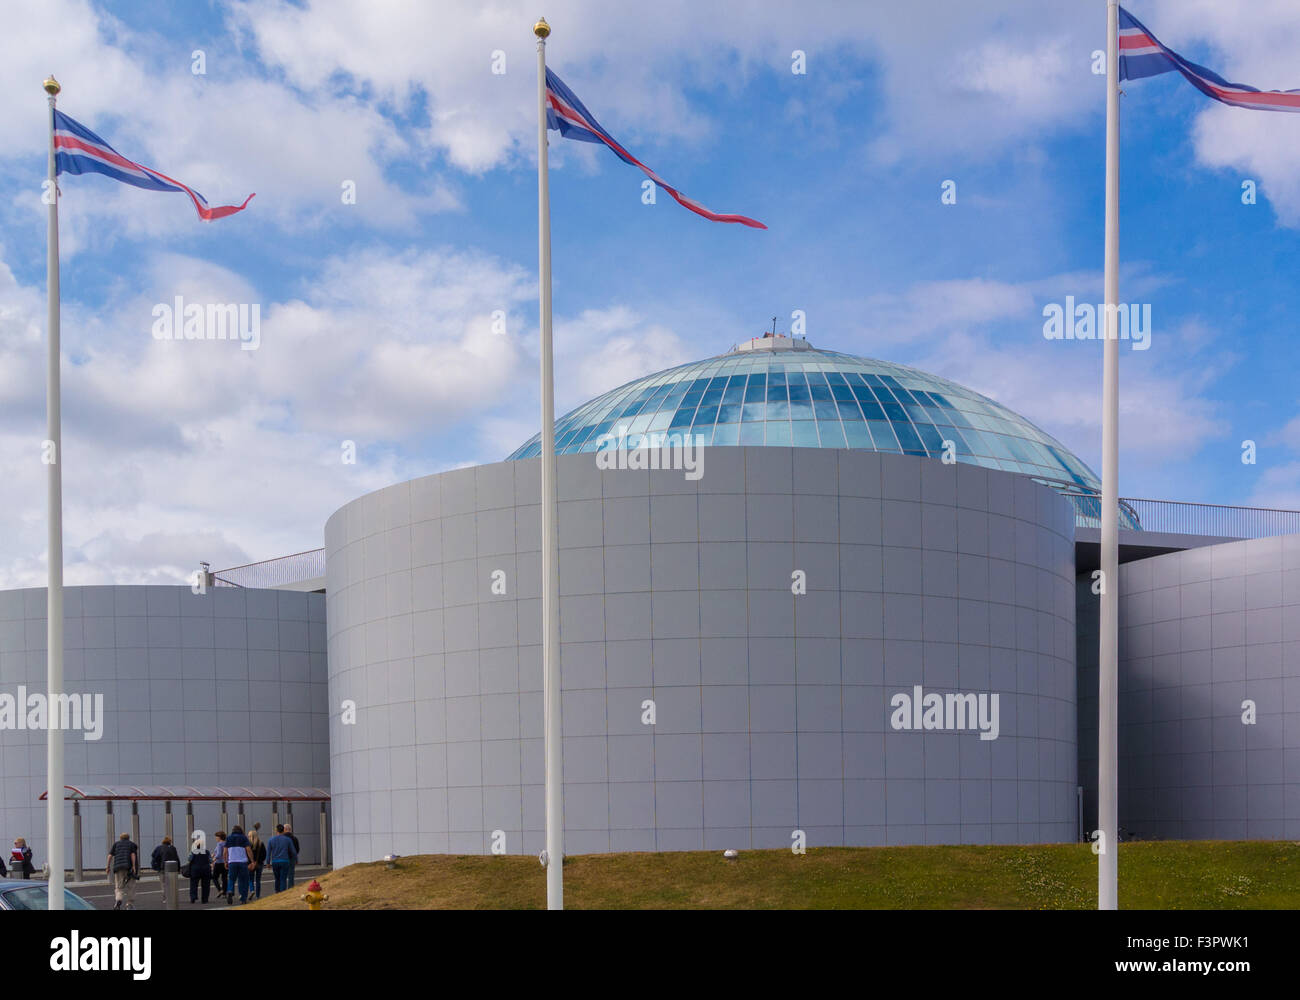 Reykjavik, Iceland. 29th July, 2015. Tour buses carrying tourists arrive at The Perlan (The Pearl), a landmark building in Reykjavik, capital of Iceland, on Oskjuhlio hill. Above the hot water storage tanks is a futuristic revolving glass-domed restaurant and viewing deck, a favorite tourist destination. © Arnold Drapkin/ZUMA Wire/Alamy Live News Stock Photo